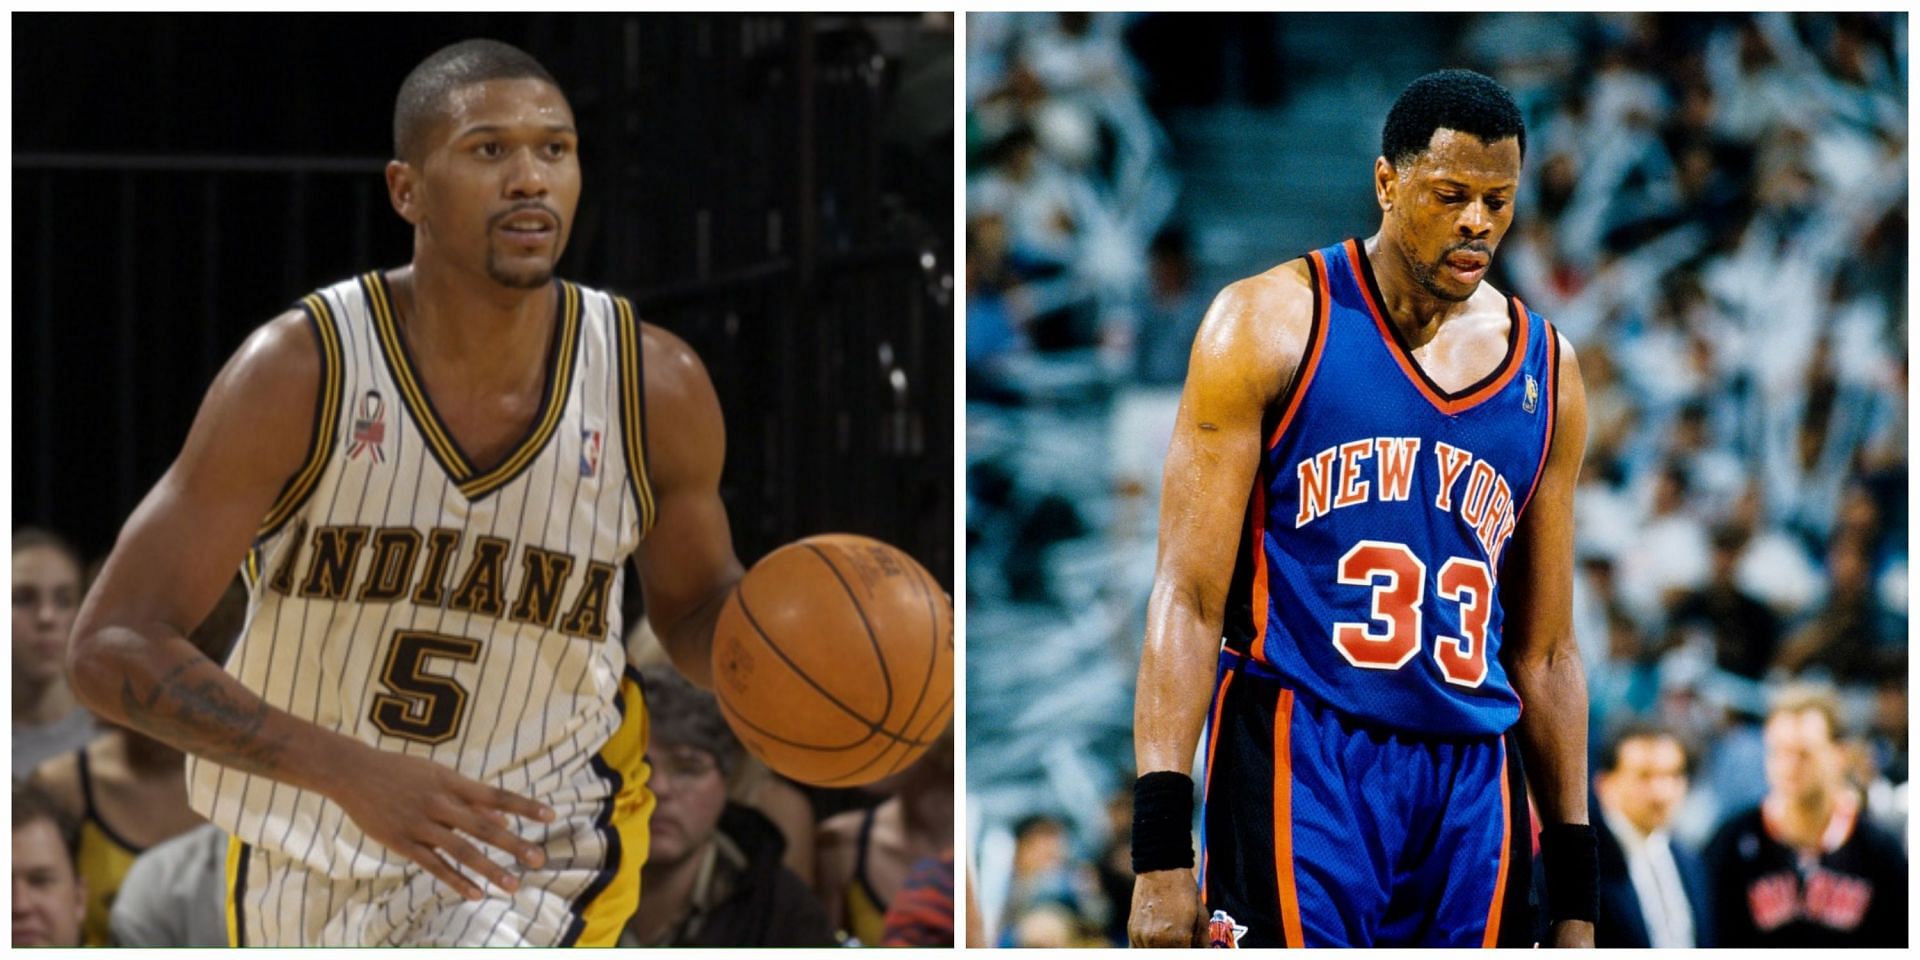 Jalen Rose opens up on the time he stole Patrick Ewing